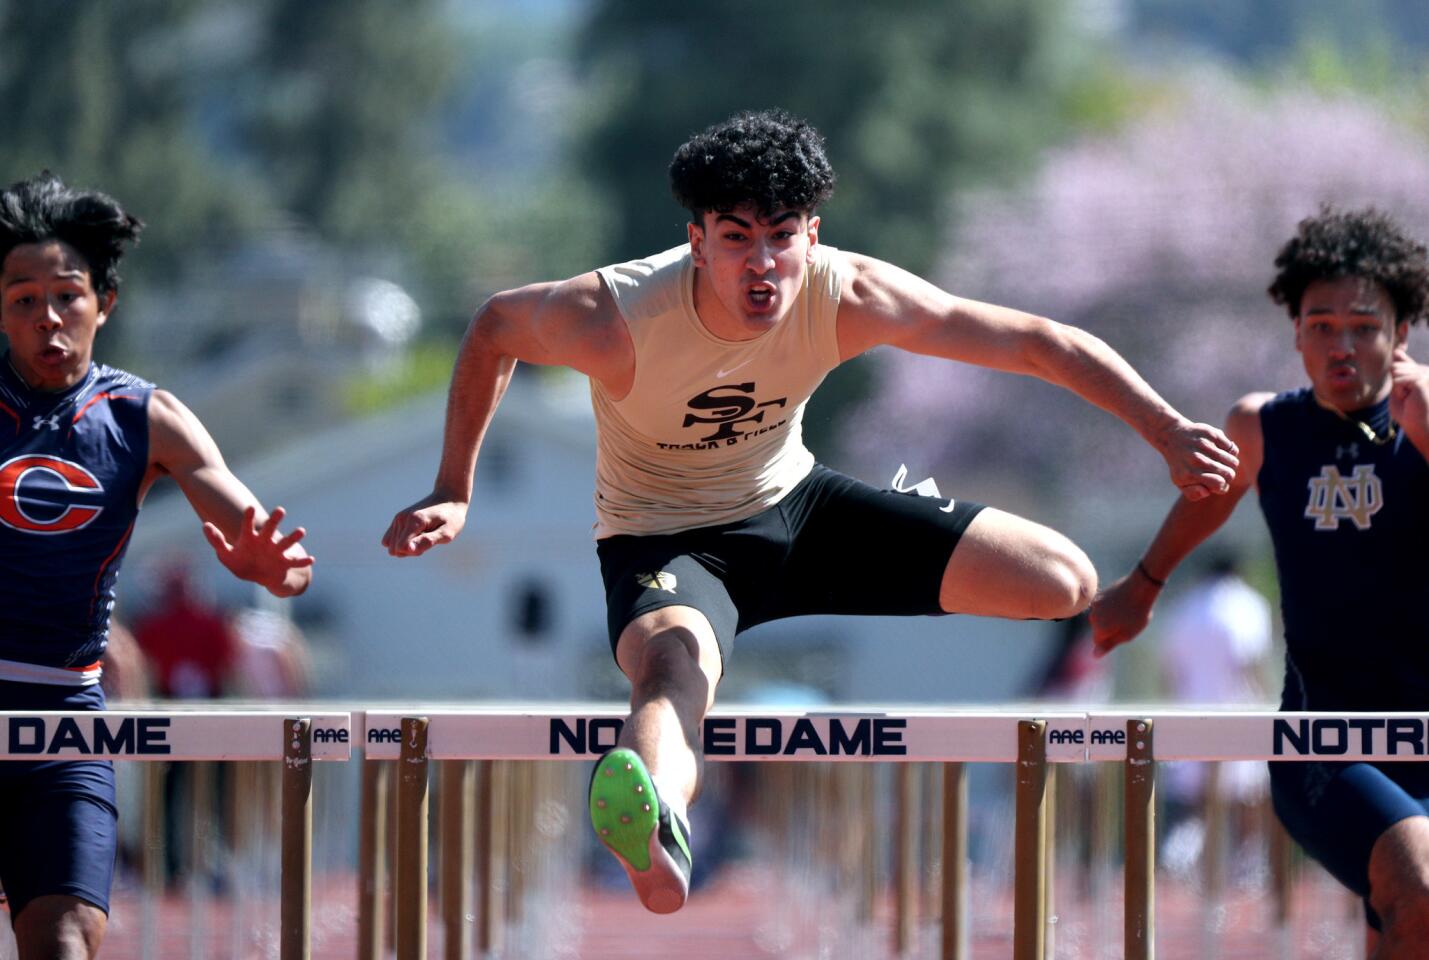 St. Francis High School runner Matthew Molina won the Mission League boys varsity 110 meter hurdles finals, at Notre Dame High School in Sherman Oaks on Wednesday, April 17, 2019.